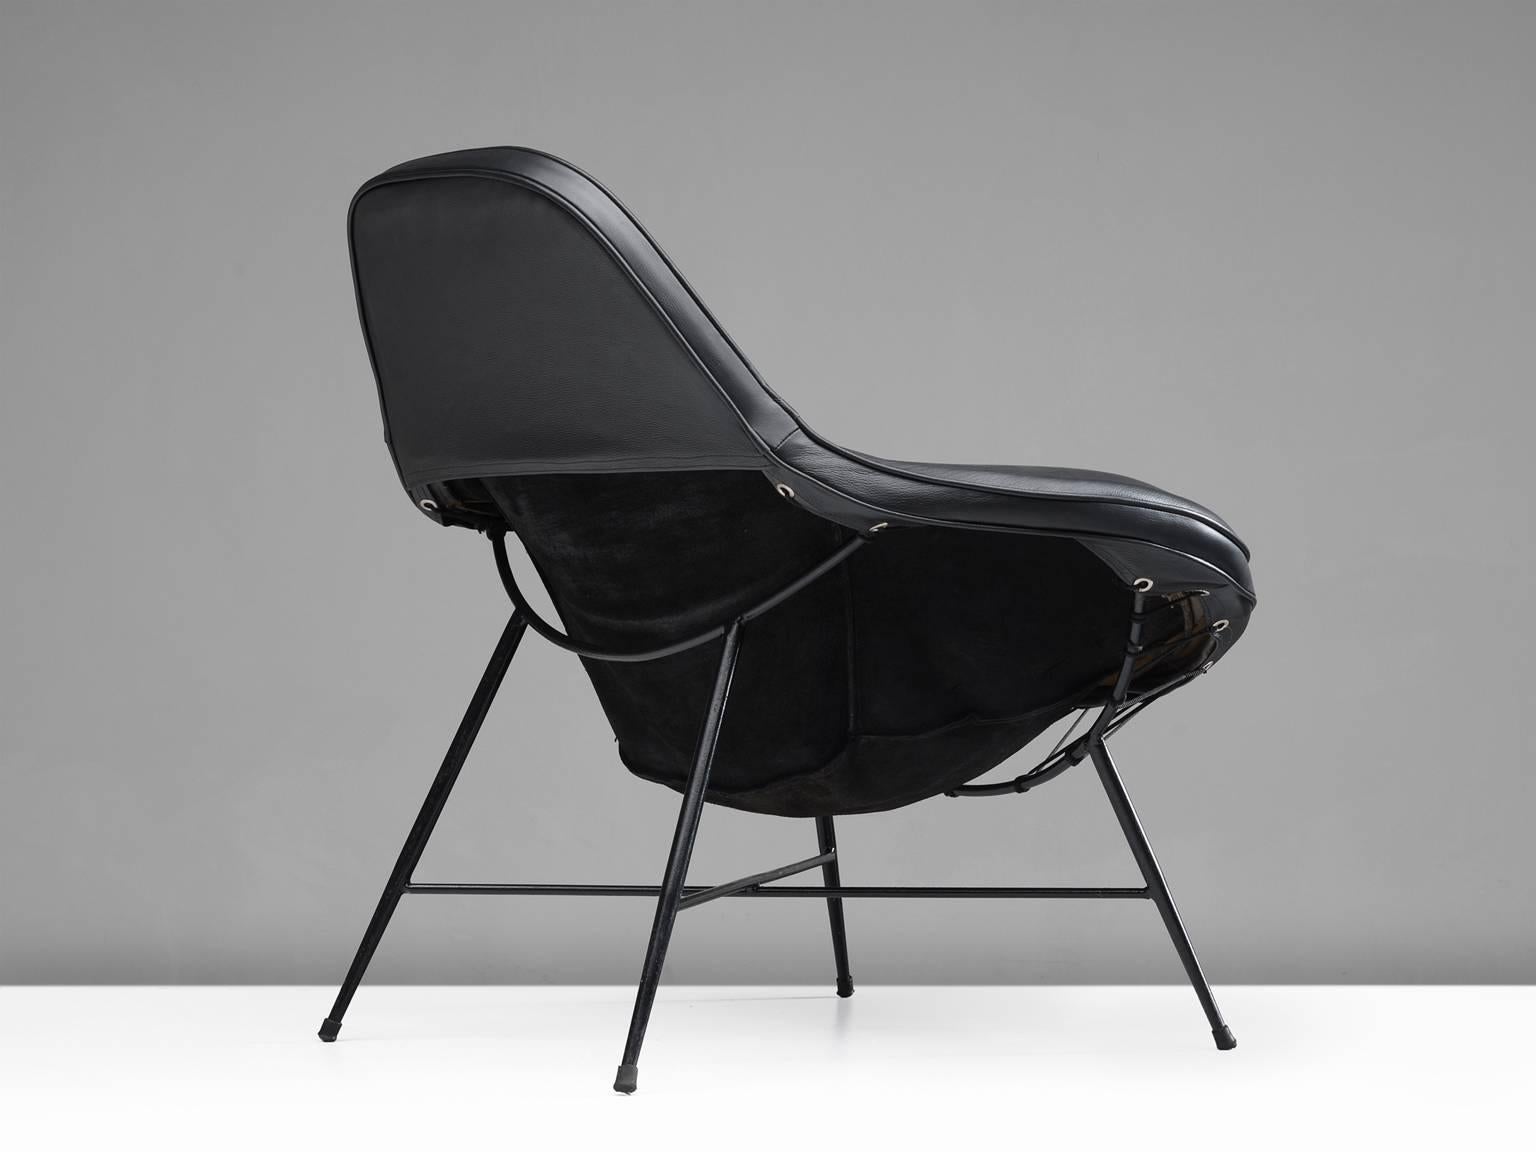 Martin Eisler, armchair, iron, upholstery, cushion and leather, Brazil, 1950.

This wide inviting armchair with thin black iron frame is designed by Martin Eisler. The seat of the chair is inviting, organic and comfortable. This shape is very